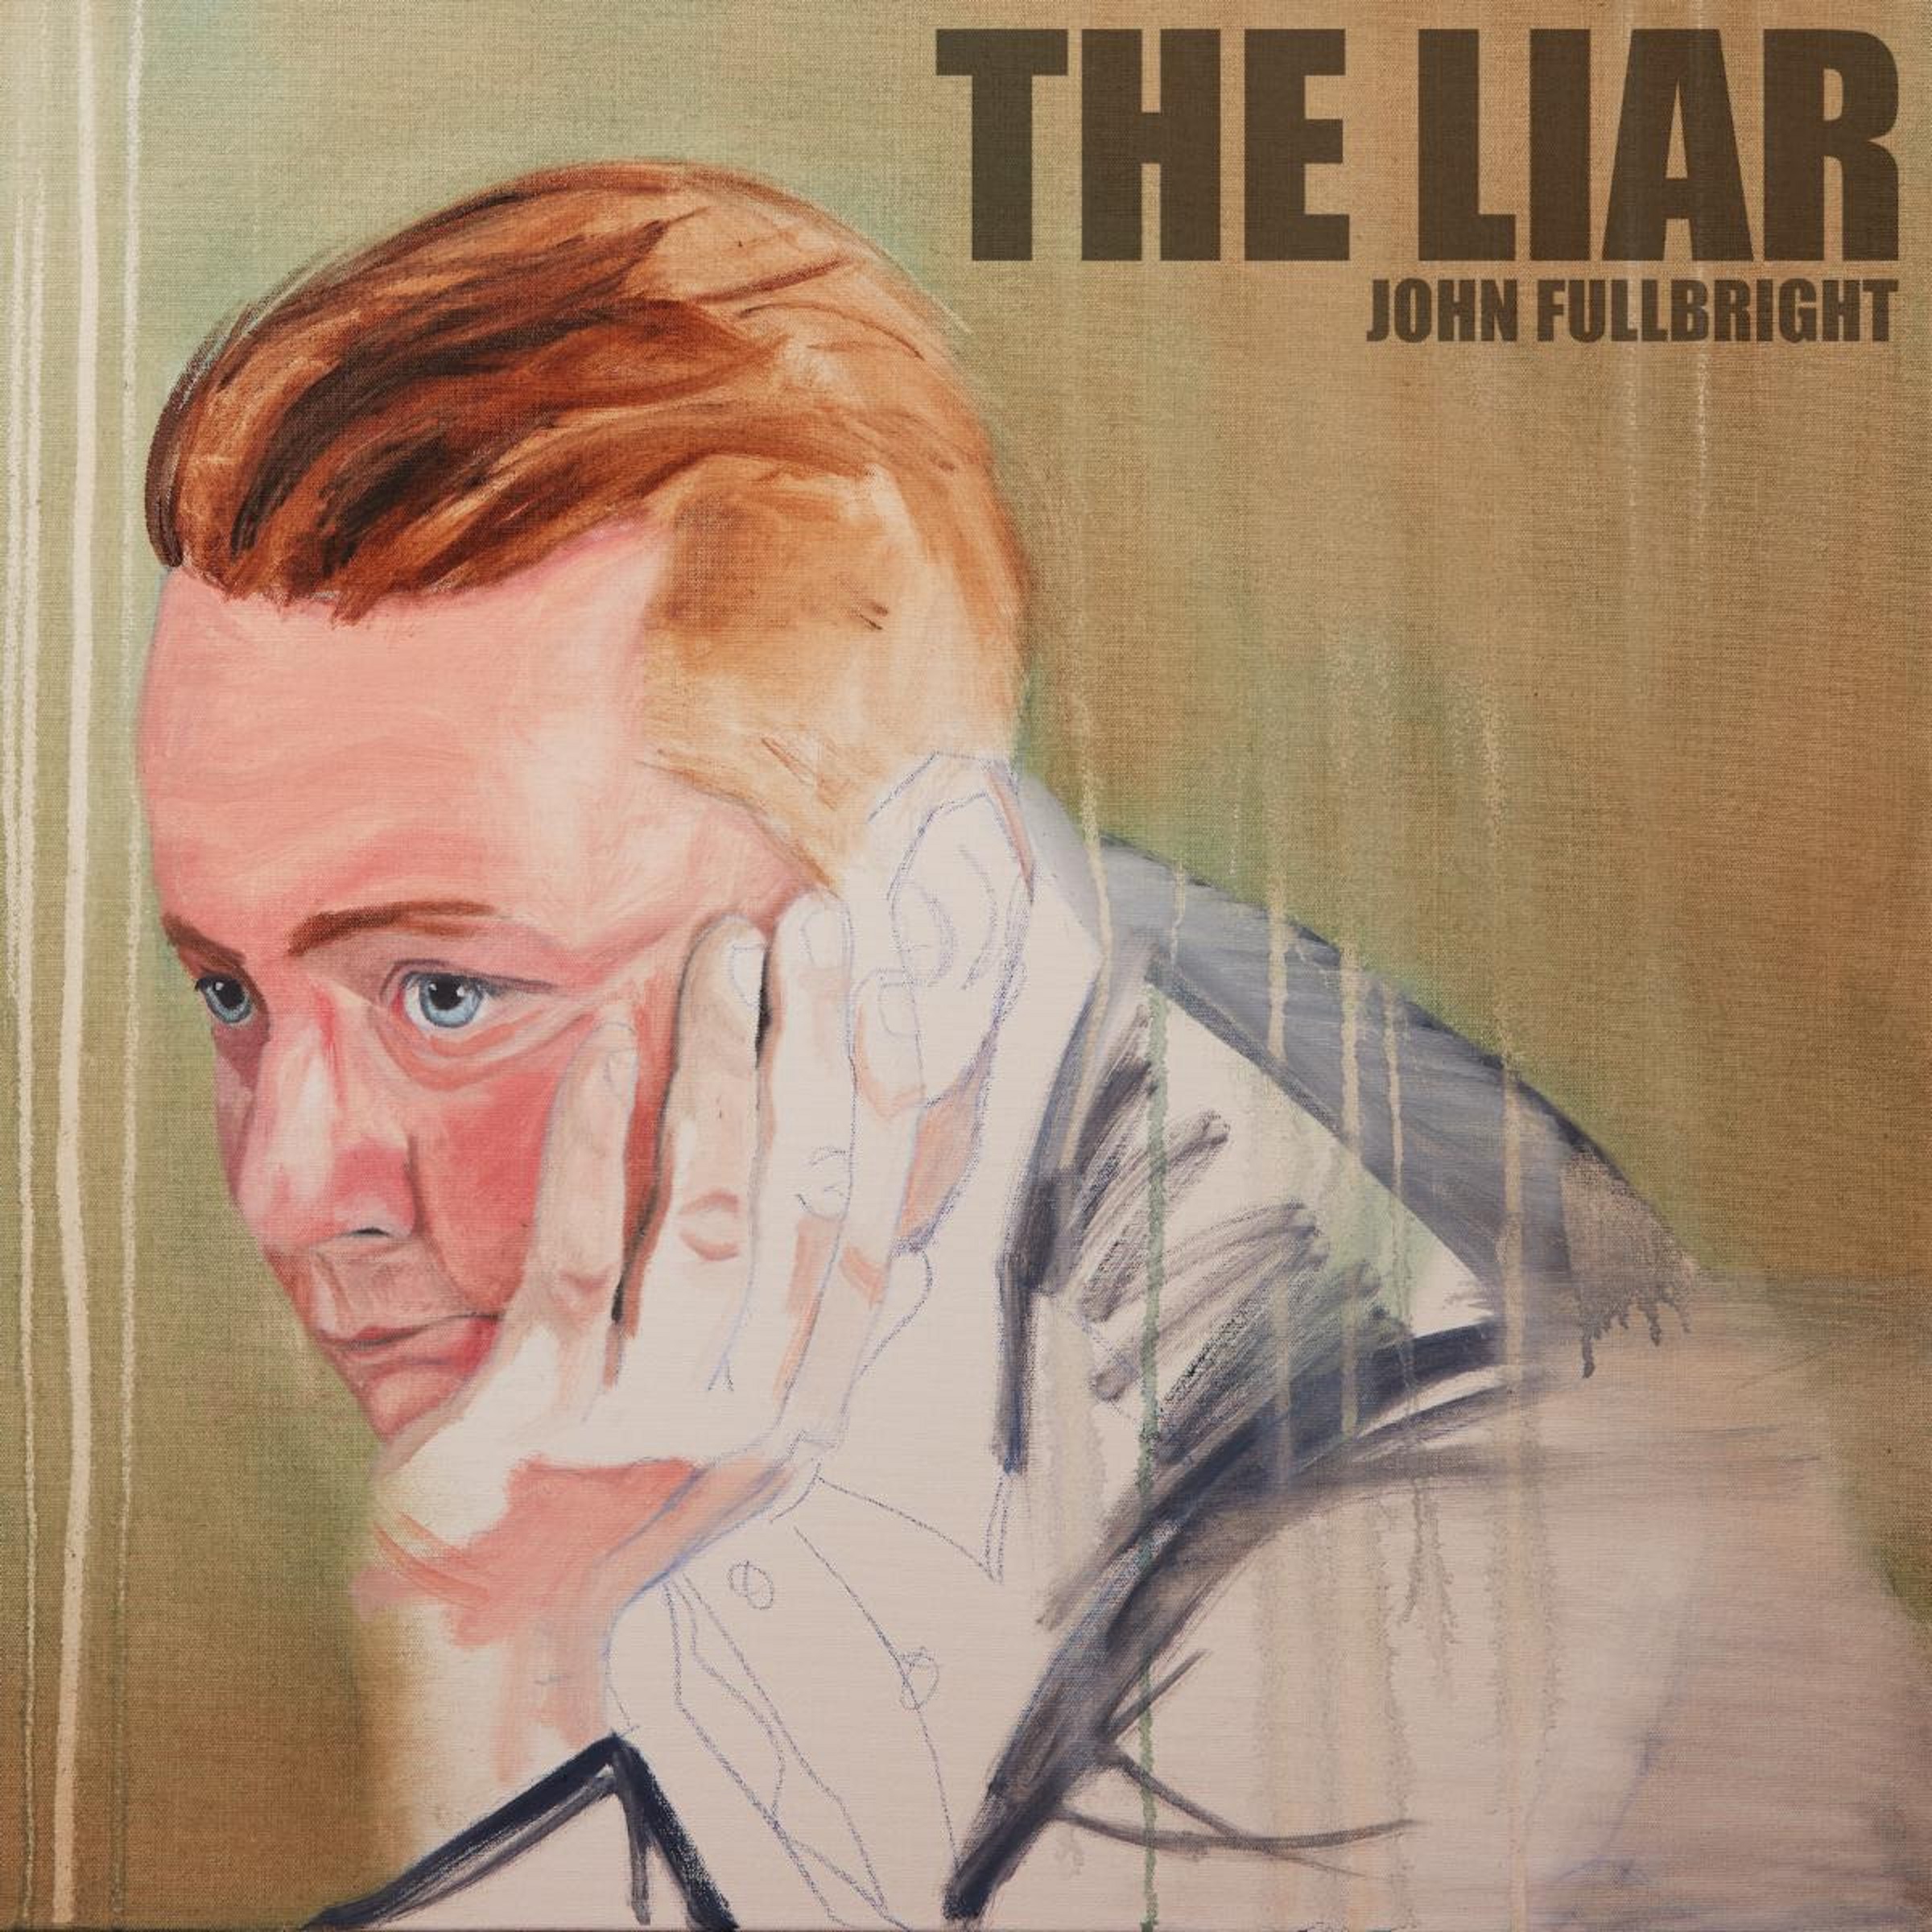 John Fullbright Returns To The World Stage With New Album "The Liar"